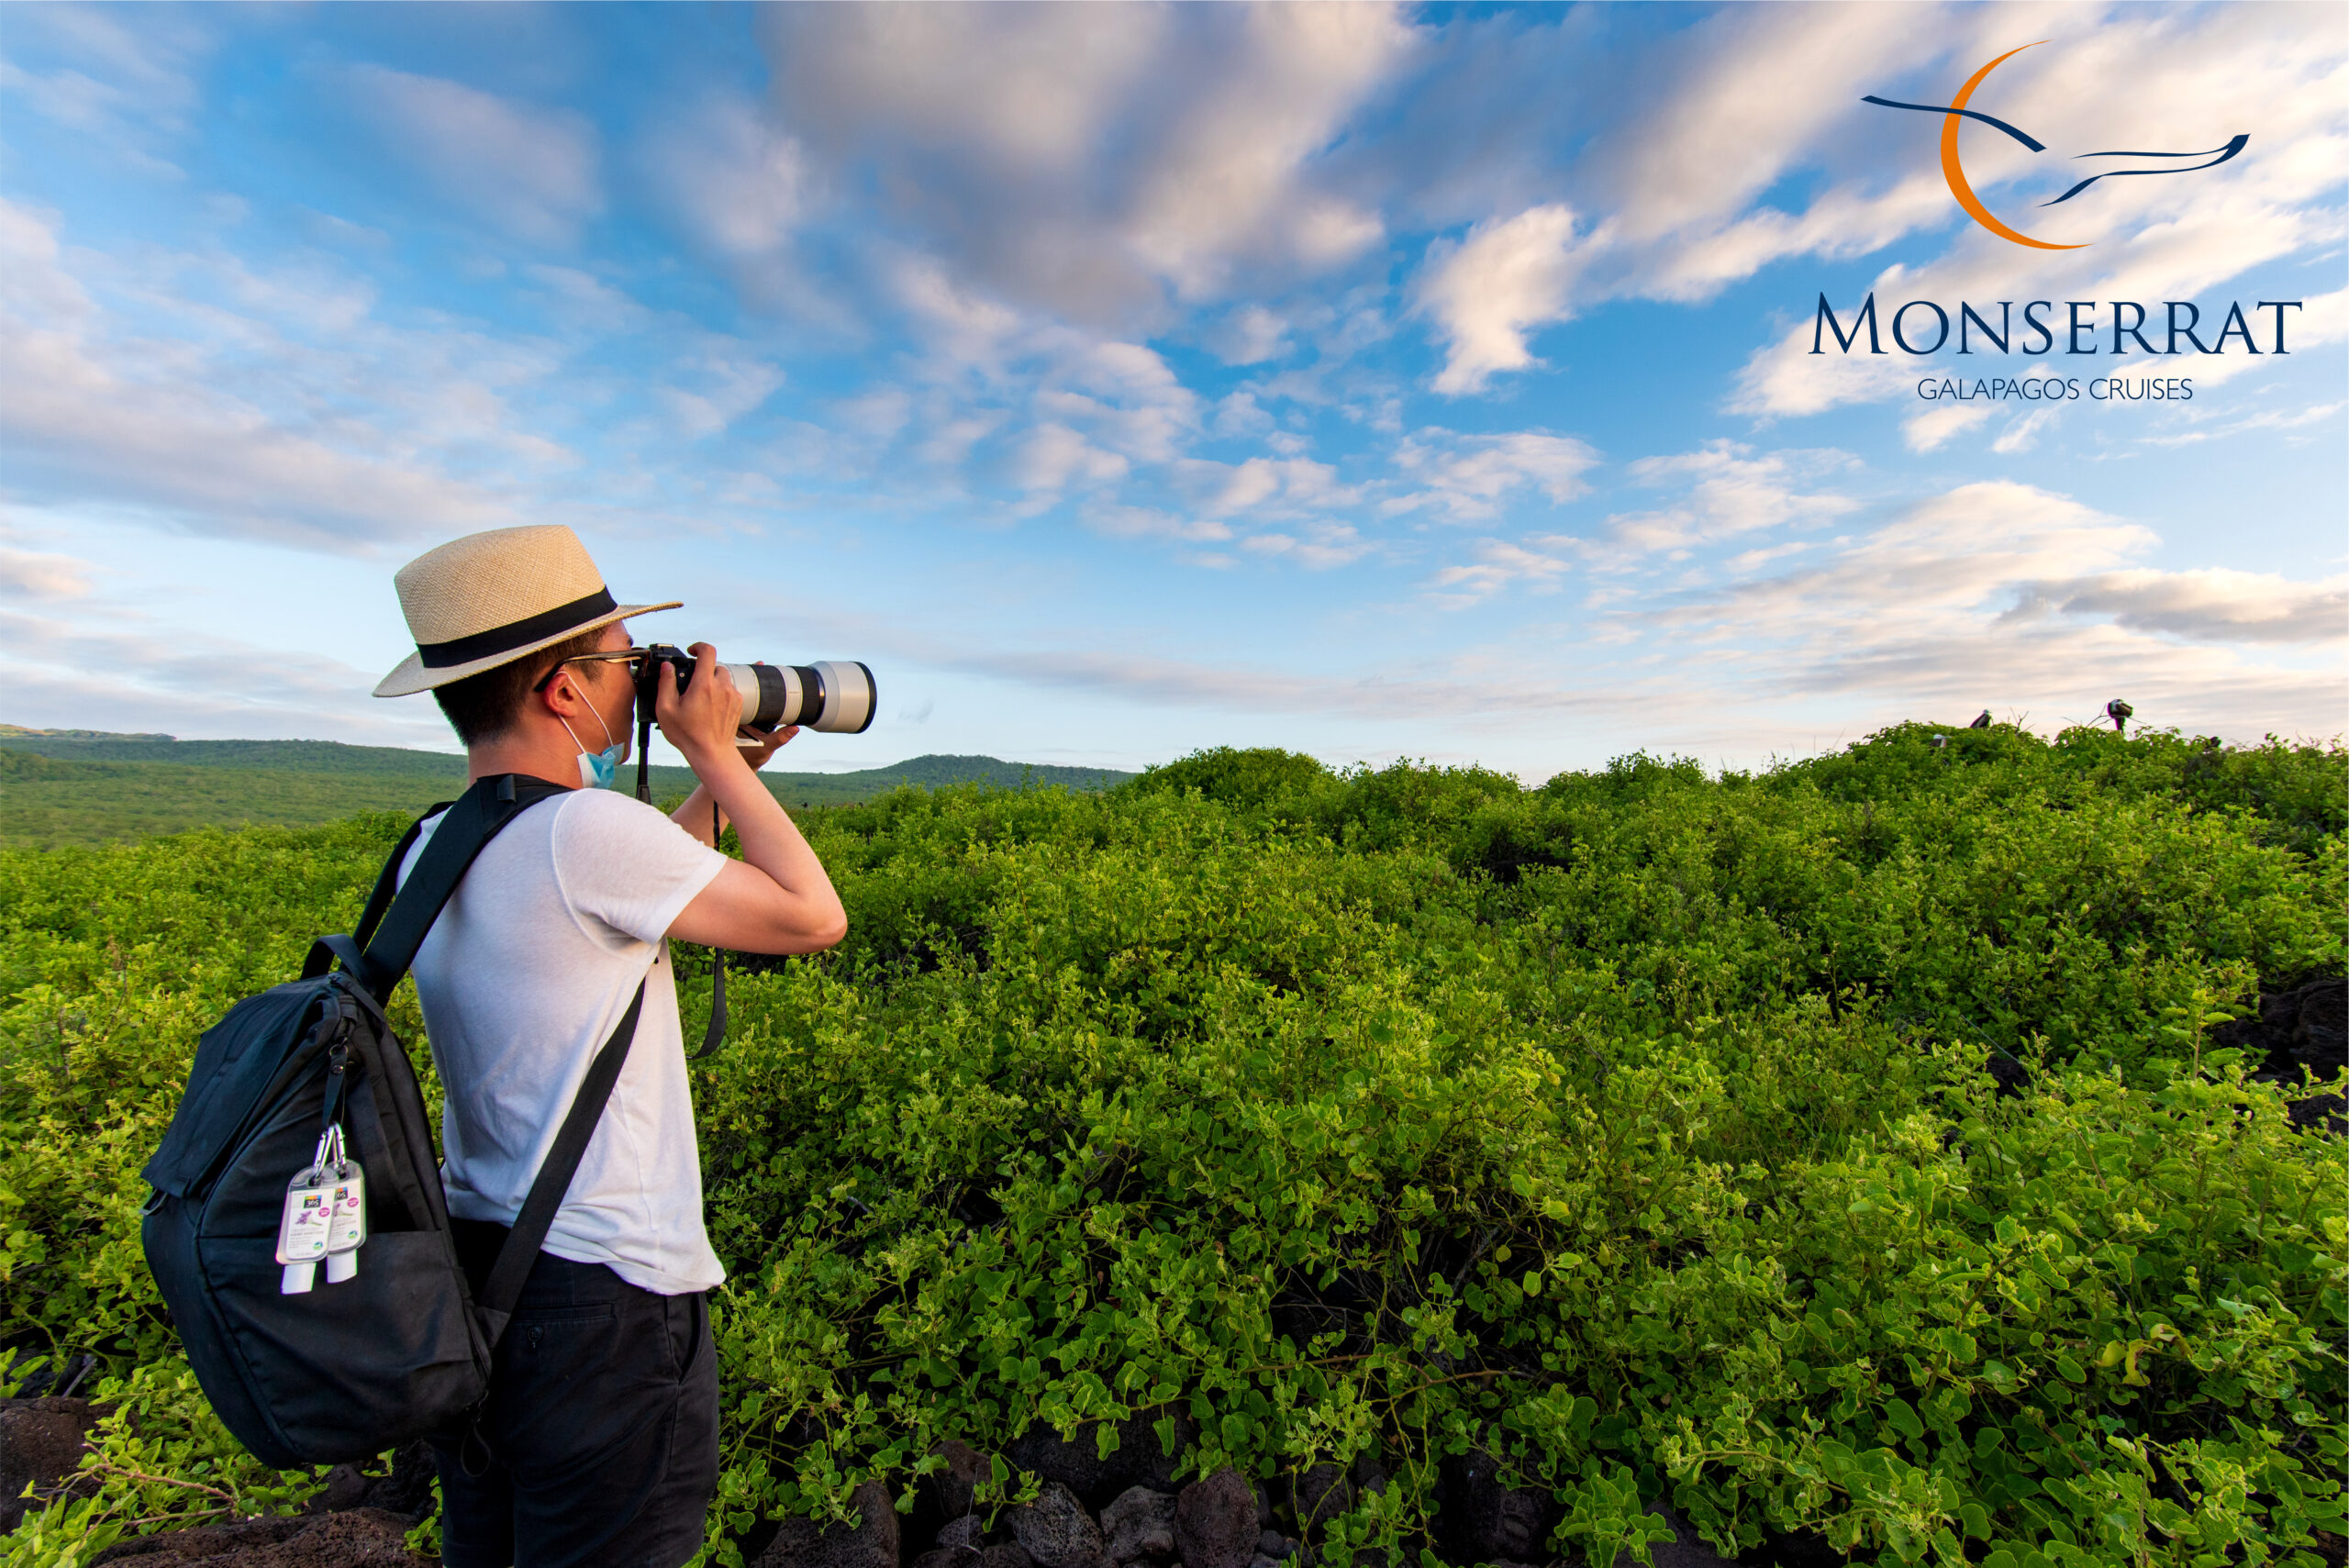 Monserrat Galapagos Cruises Guest Experience 15 High Res scaled